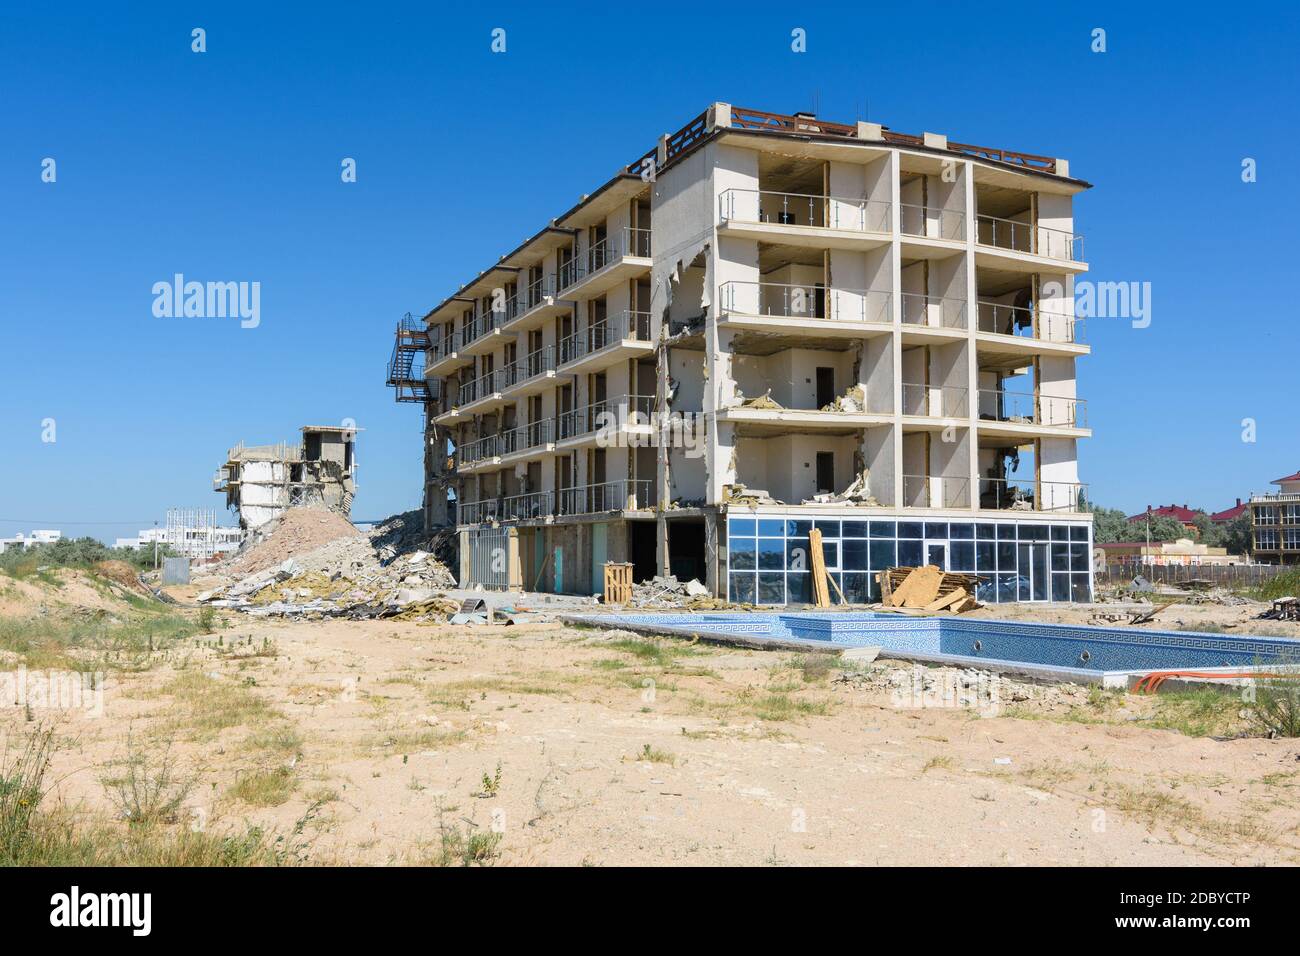 Illegal construction on the coastal side, demolition of the hotel complex Stock Photo